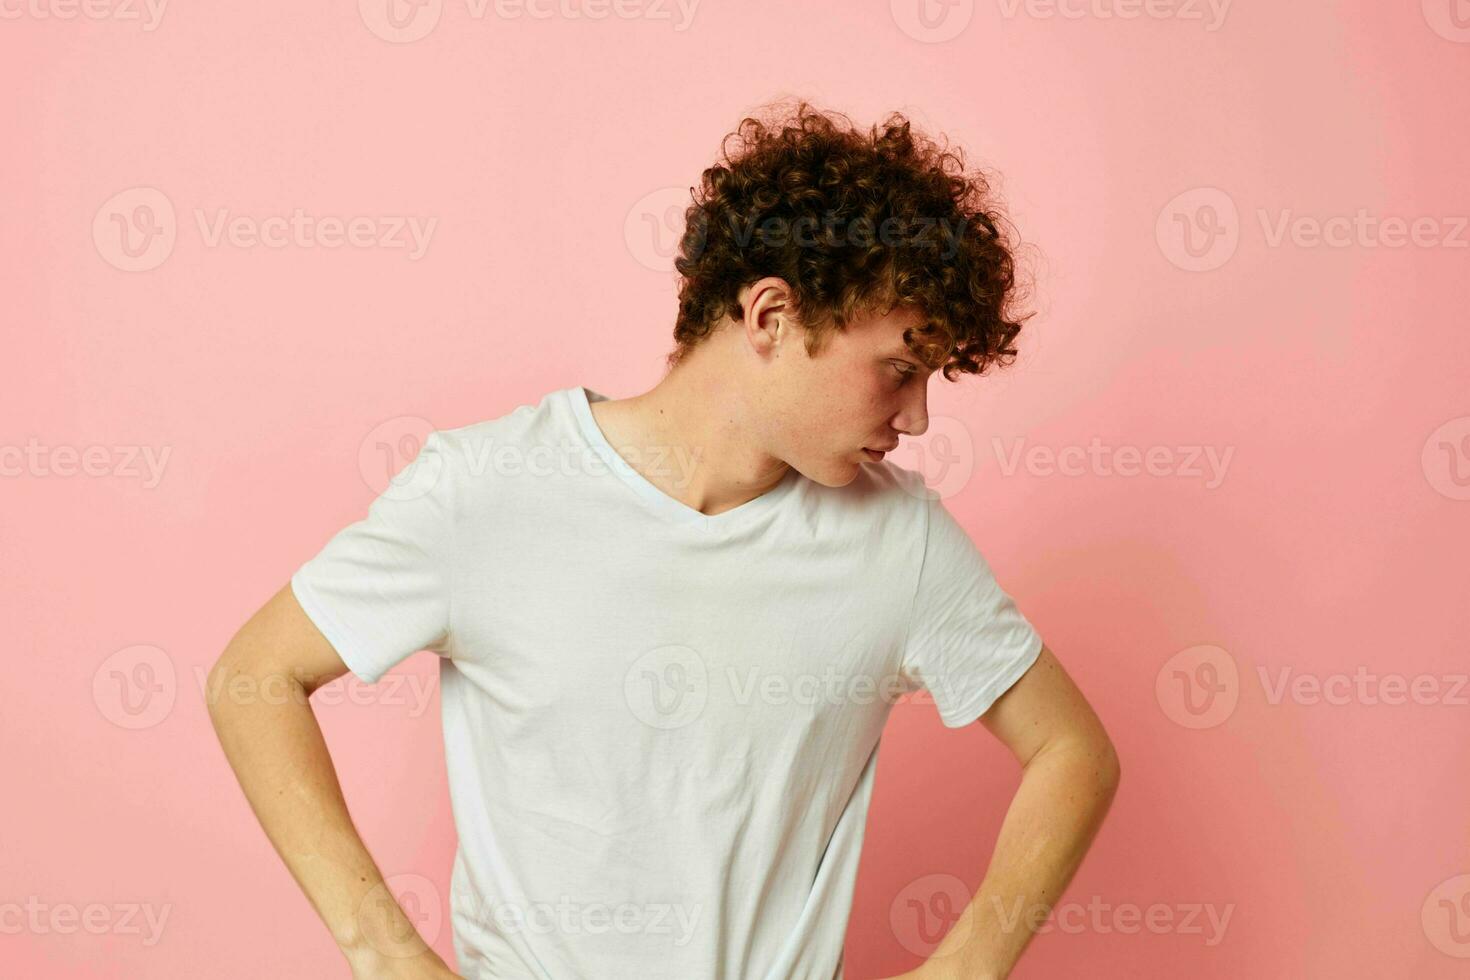 cute red-haired guy posing youth style white t-shirt isolated background unaltered photo